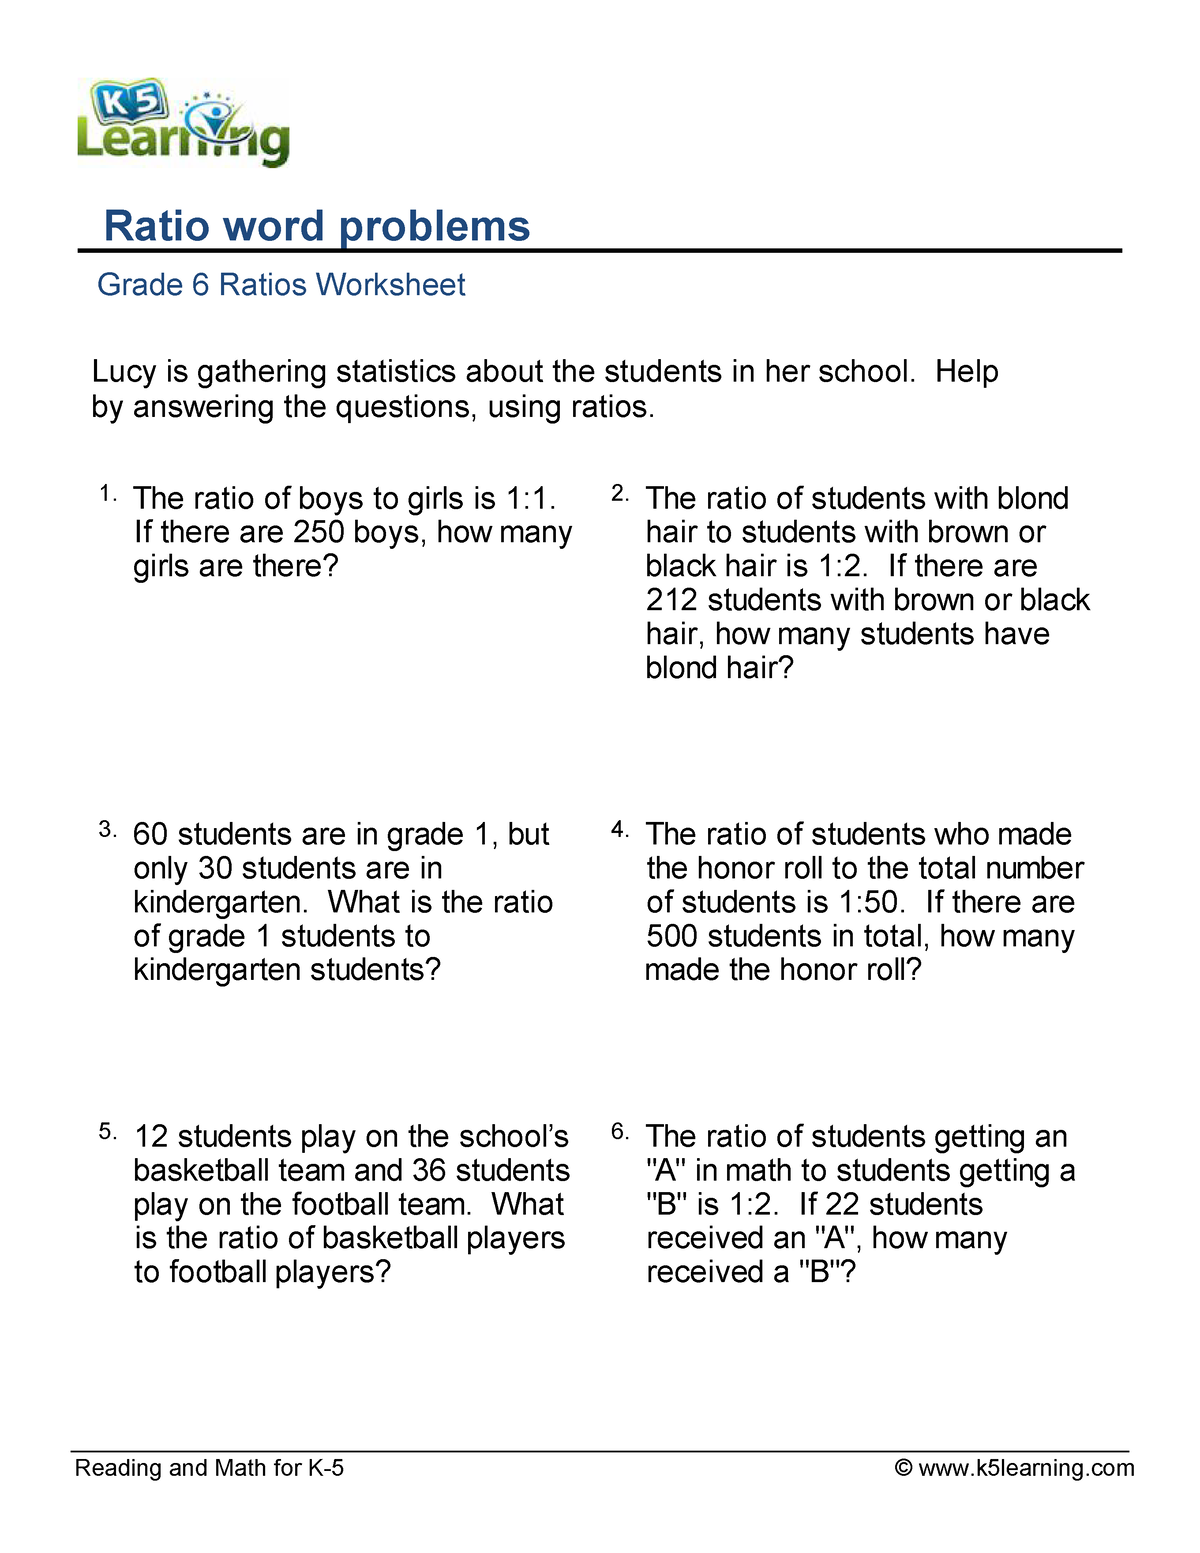 grade 6 math word problems with solutions and explanations